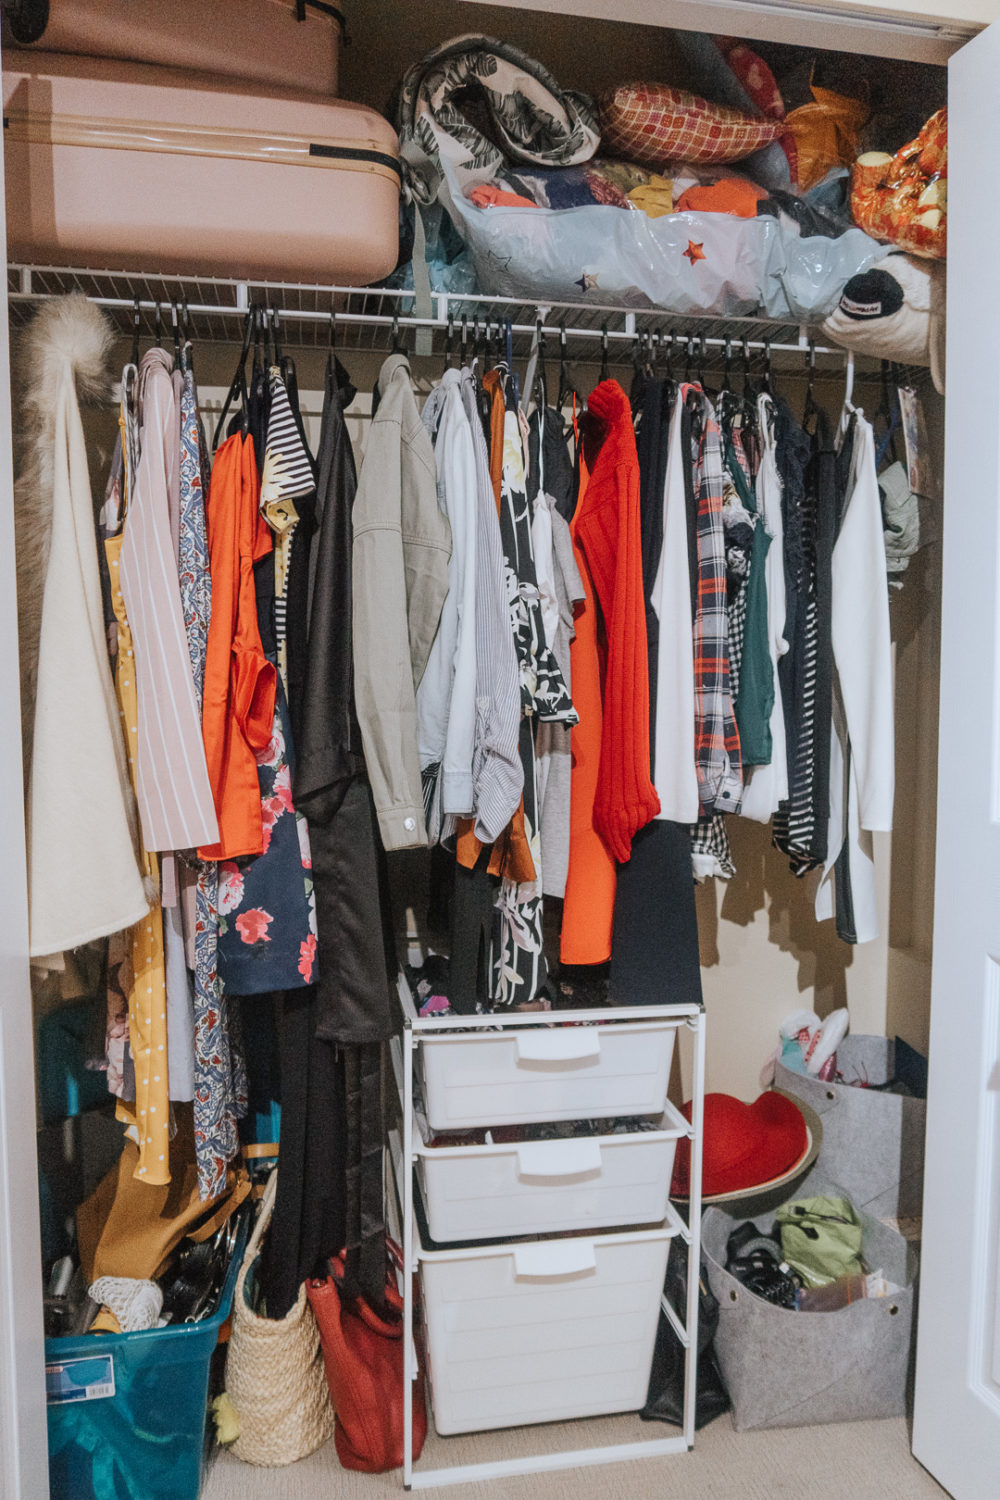 What my closet looked like before organizing with the KonMari Method